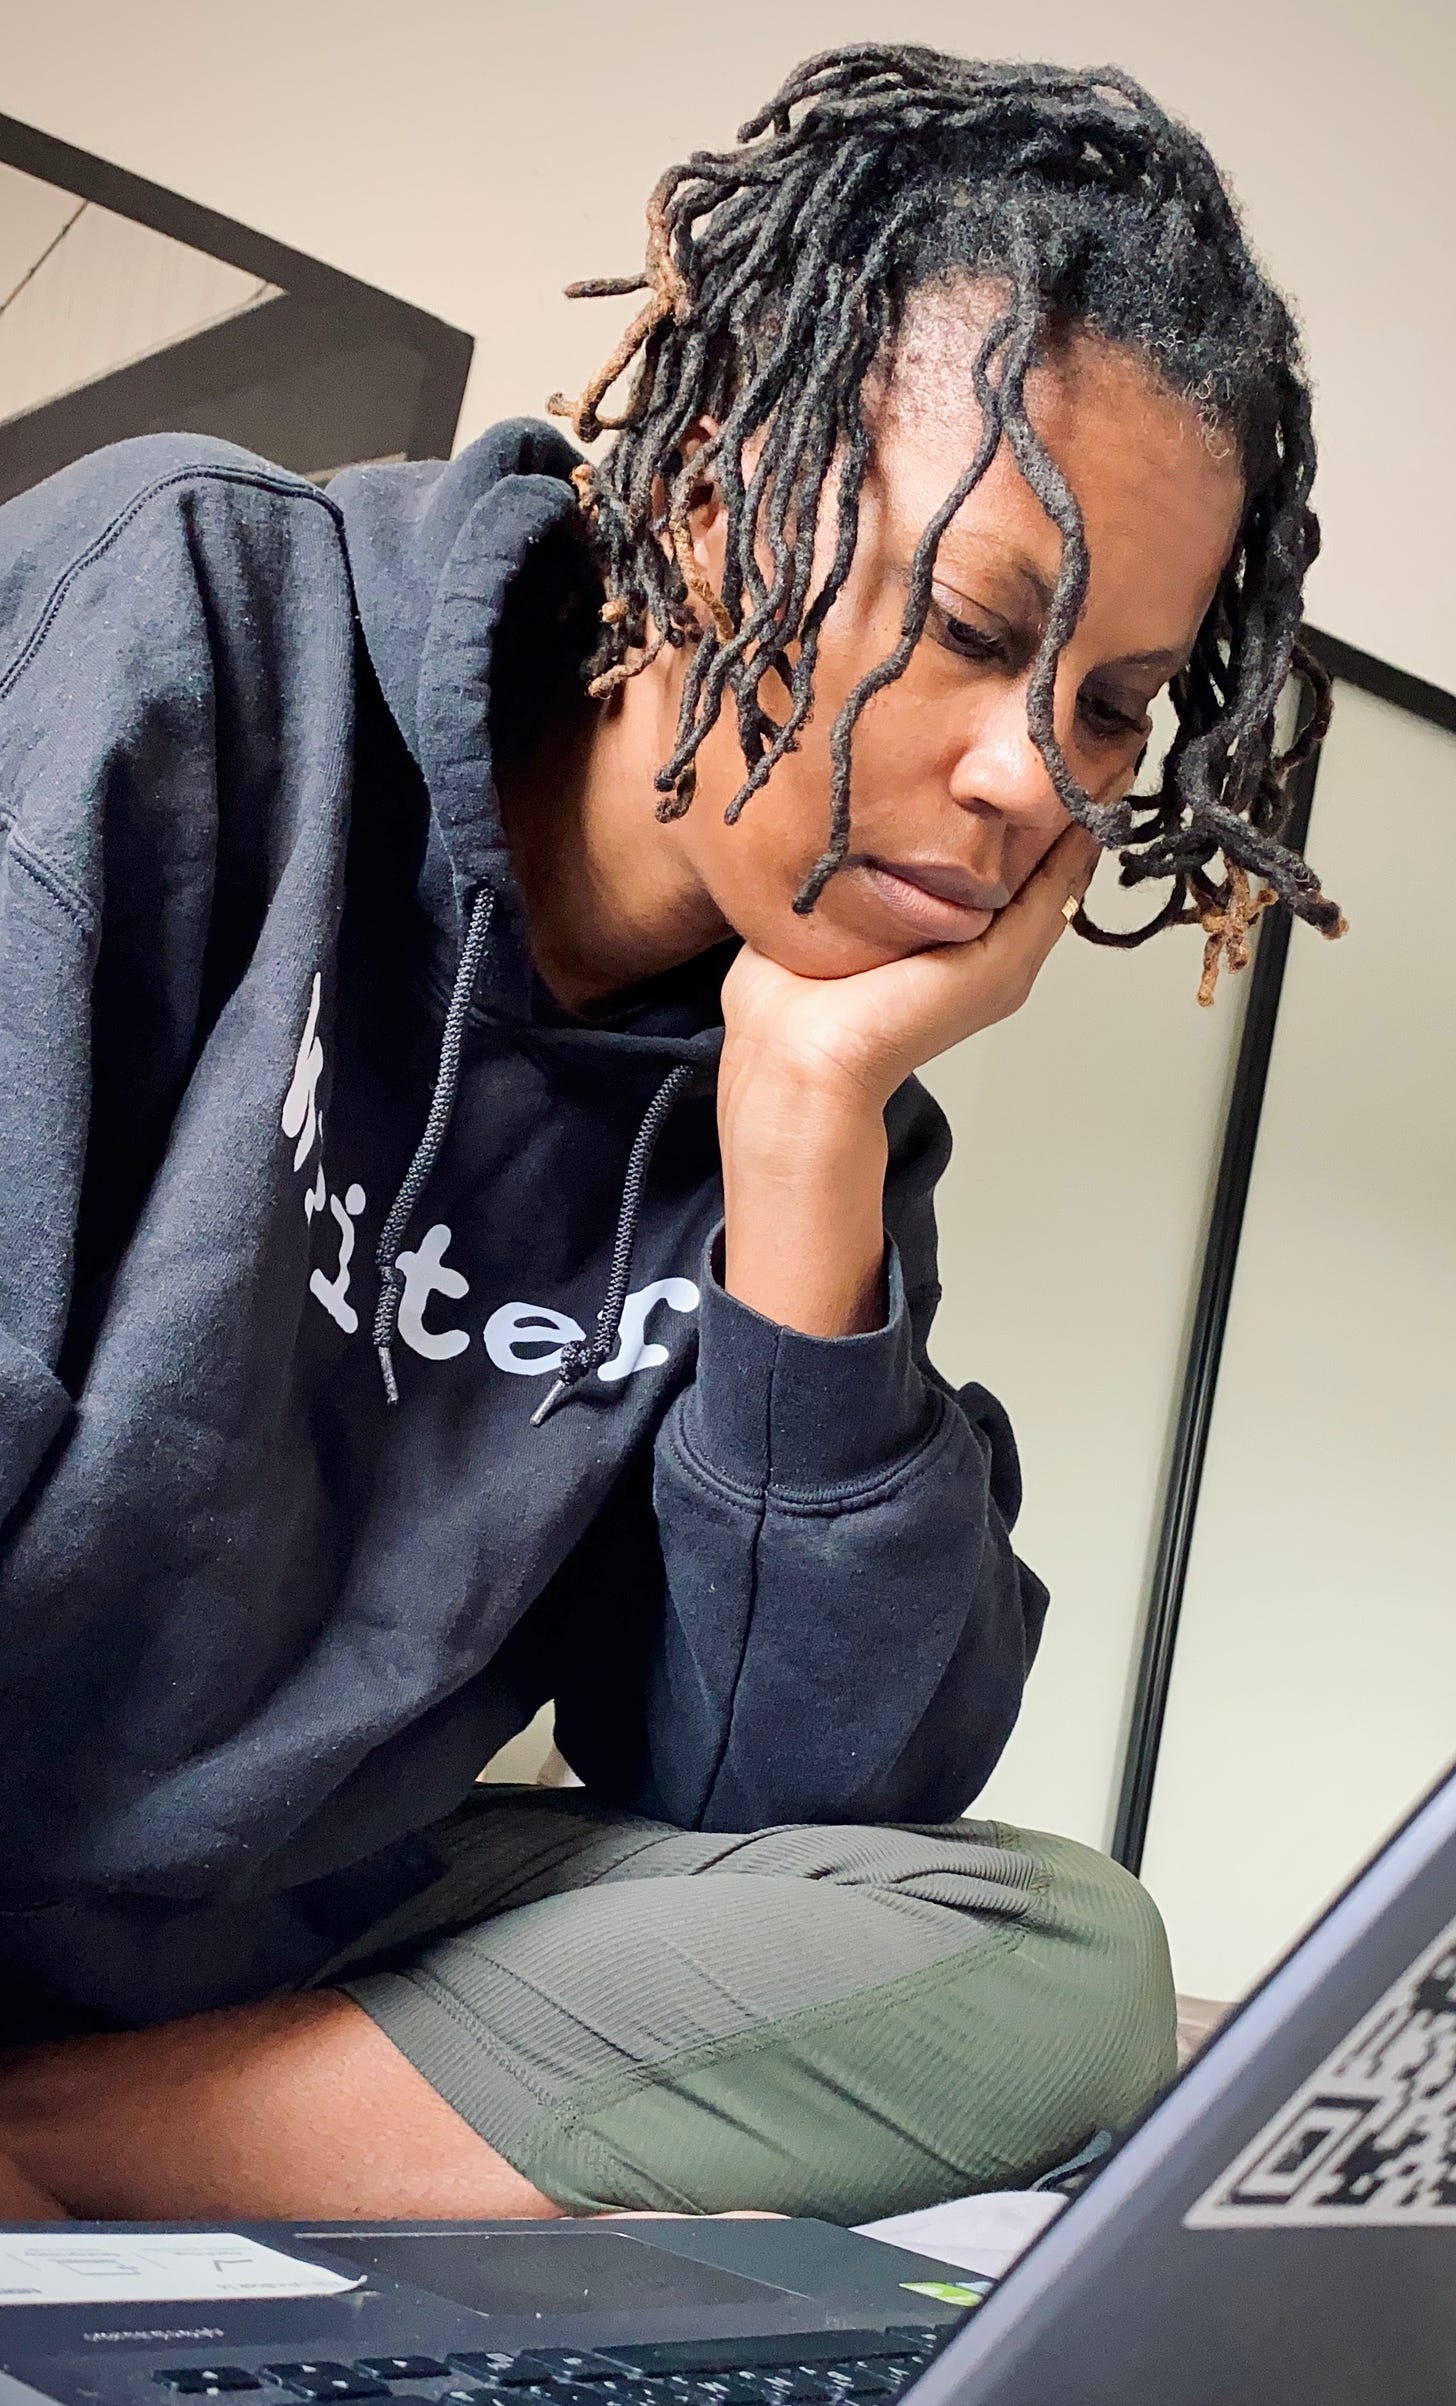 Sandra has black locs, wears a hoodie that says writer on it, sits in front of their laptop